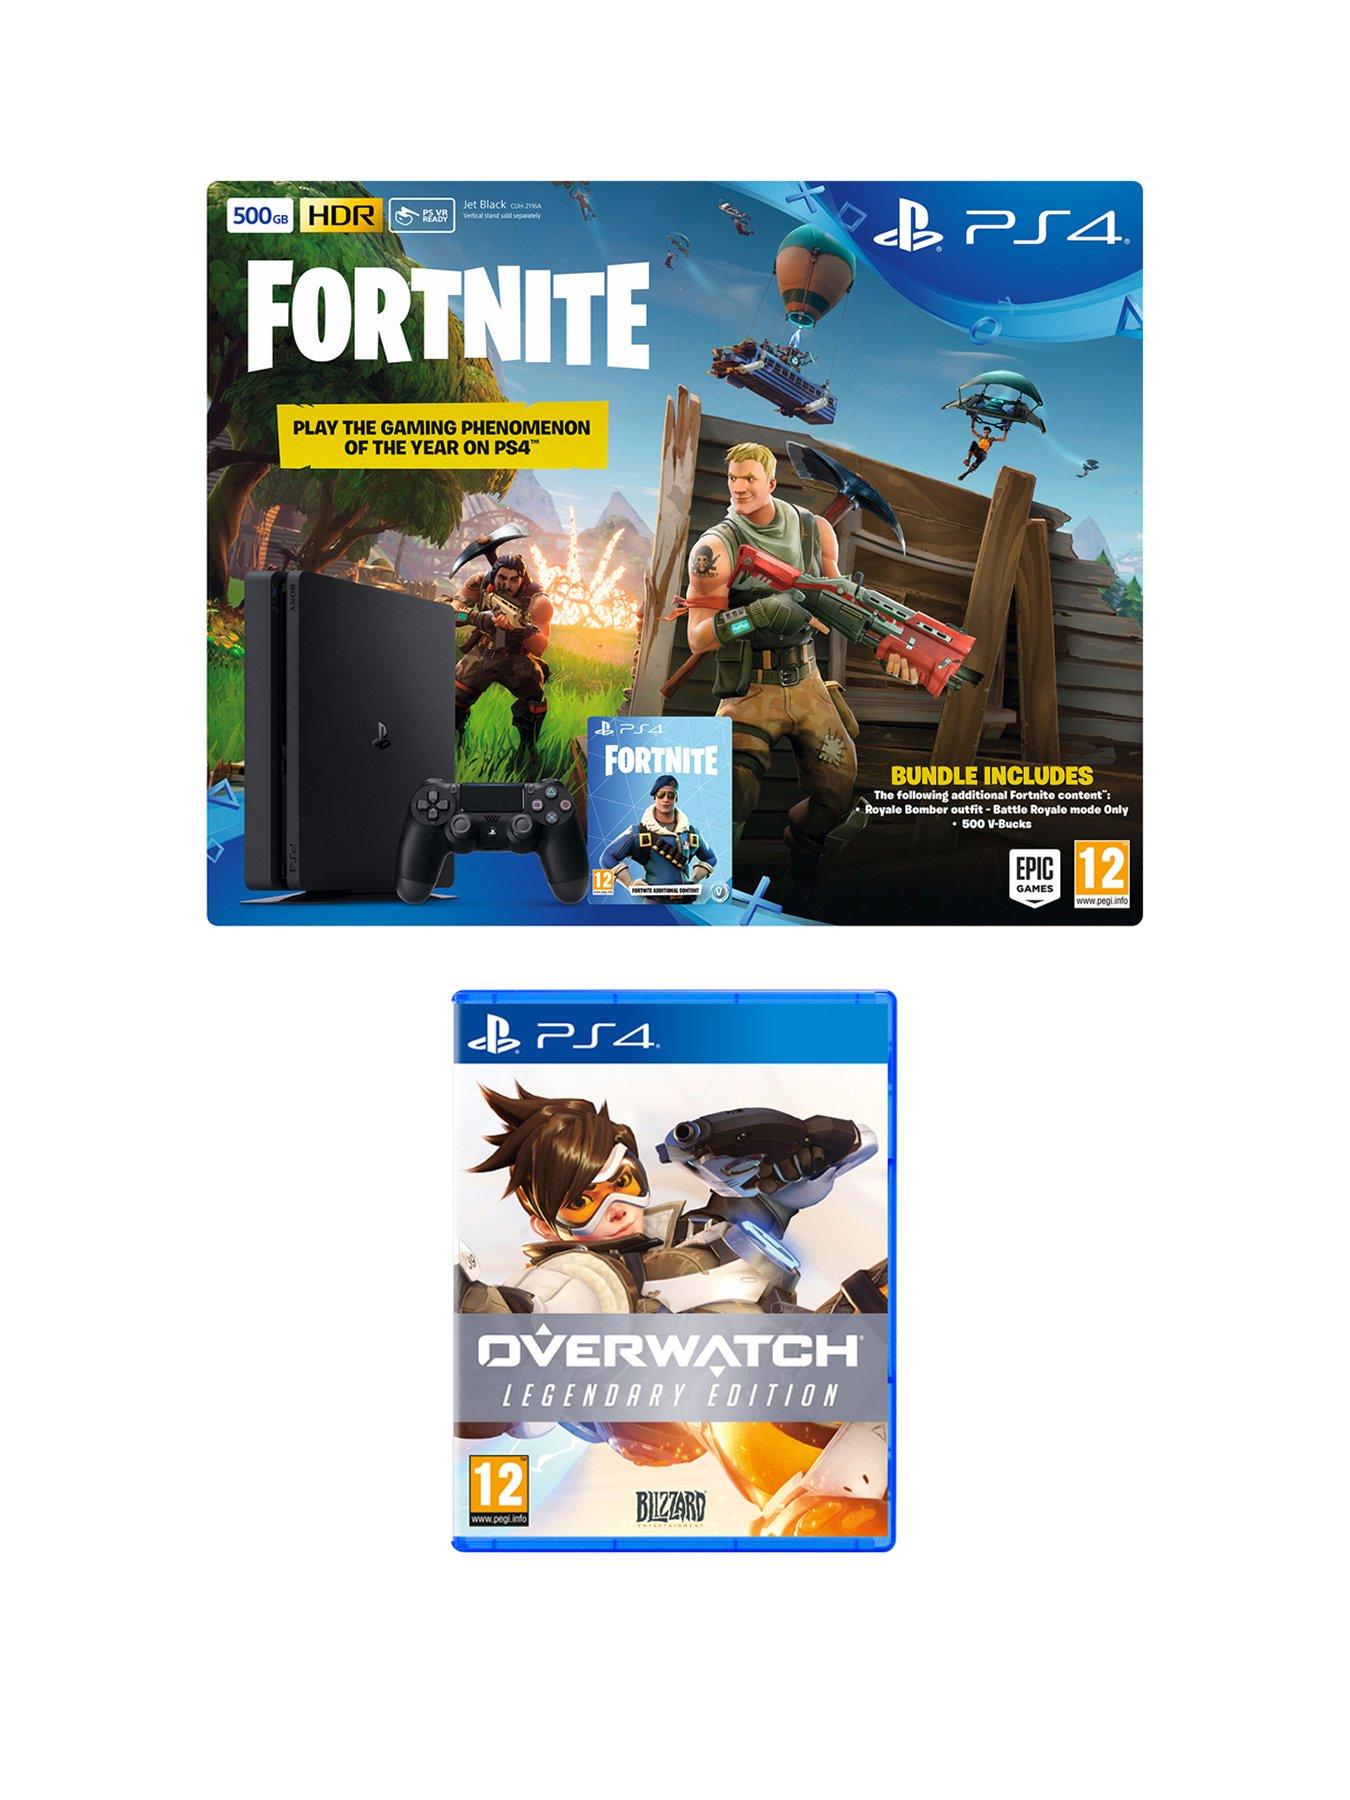 Playstation 4 Fortnite Ps4 500gb Bundle With Overwatch Legendary - playstation 4 fortnite ps4 500gb bundle with overwatch legendary edition plus optional extras